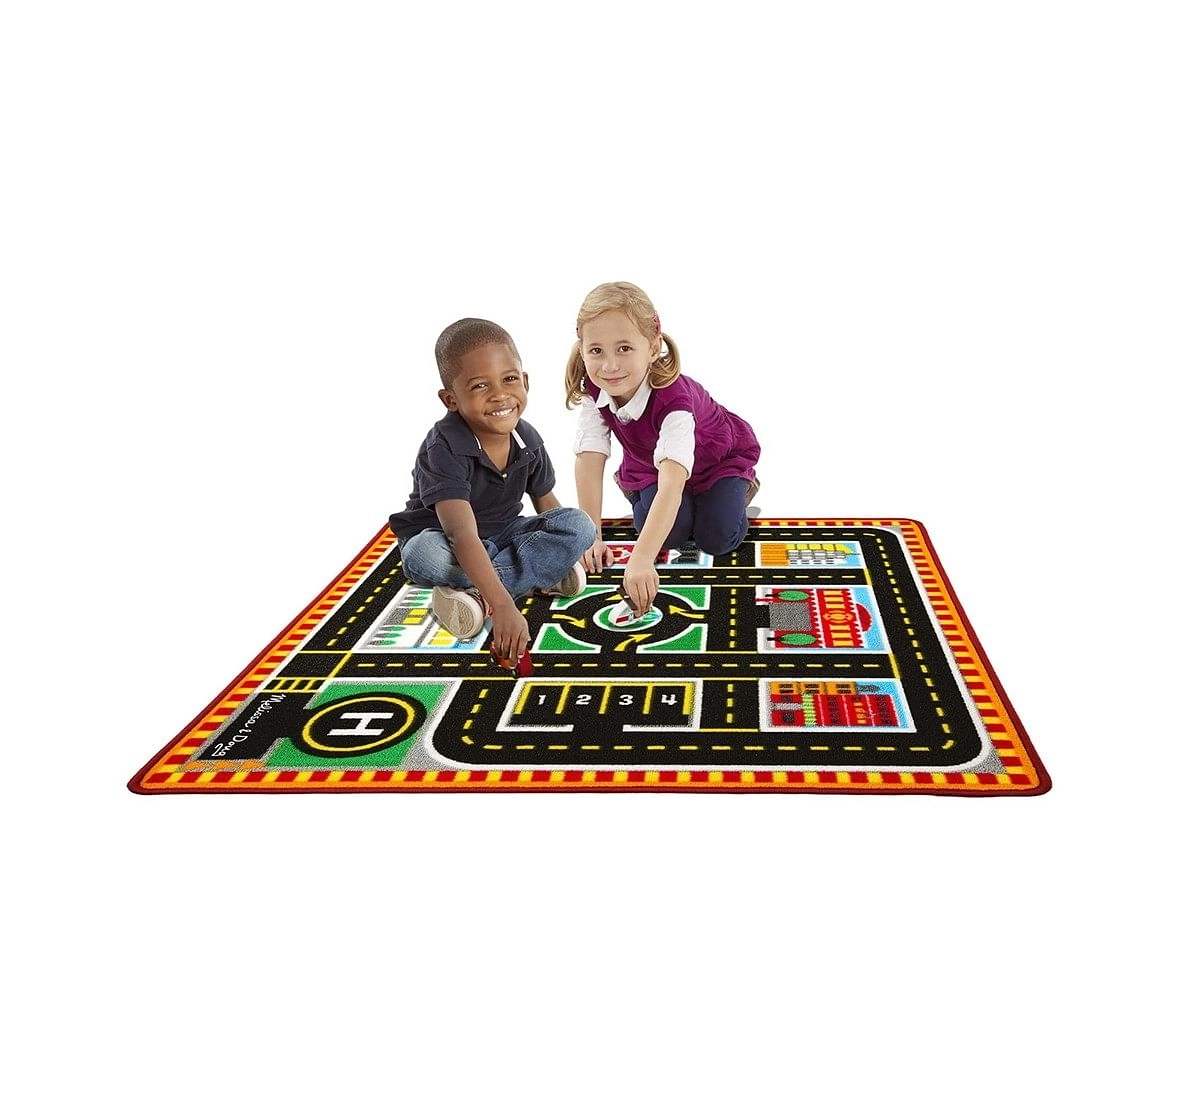 Melissa & Doug : Round the city rescue rug Baby Gear for Kids age 3Y+ 